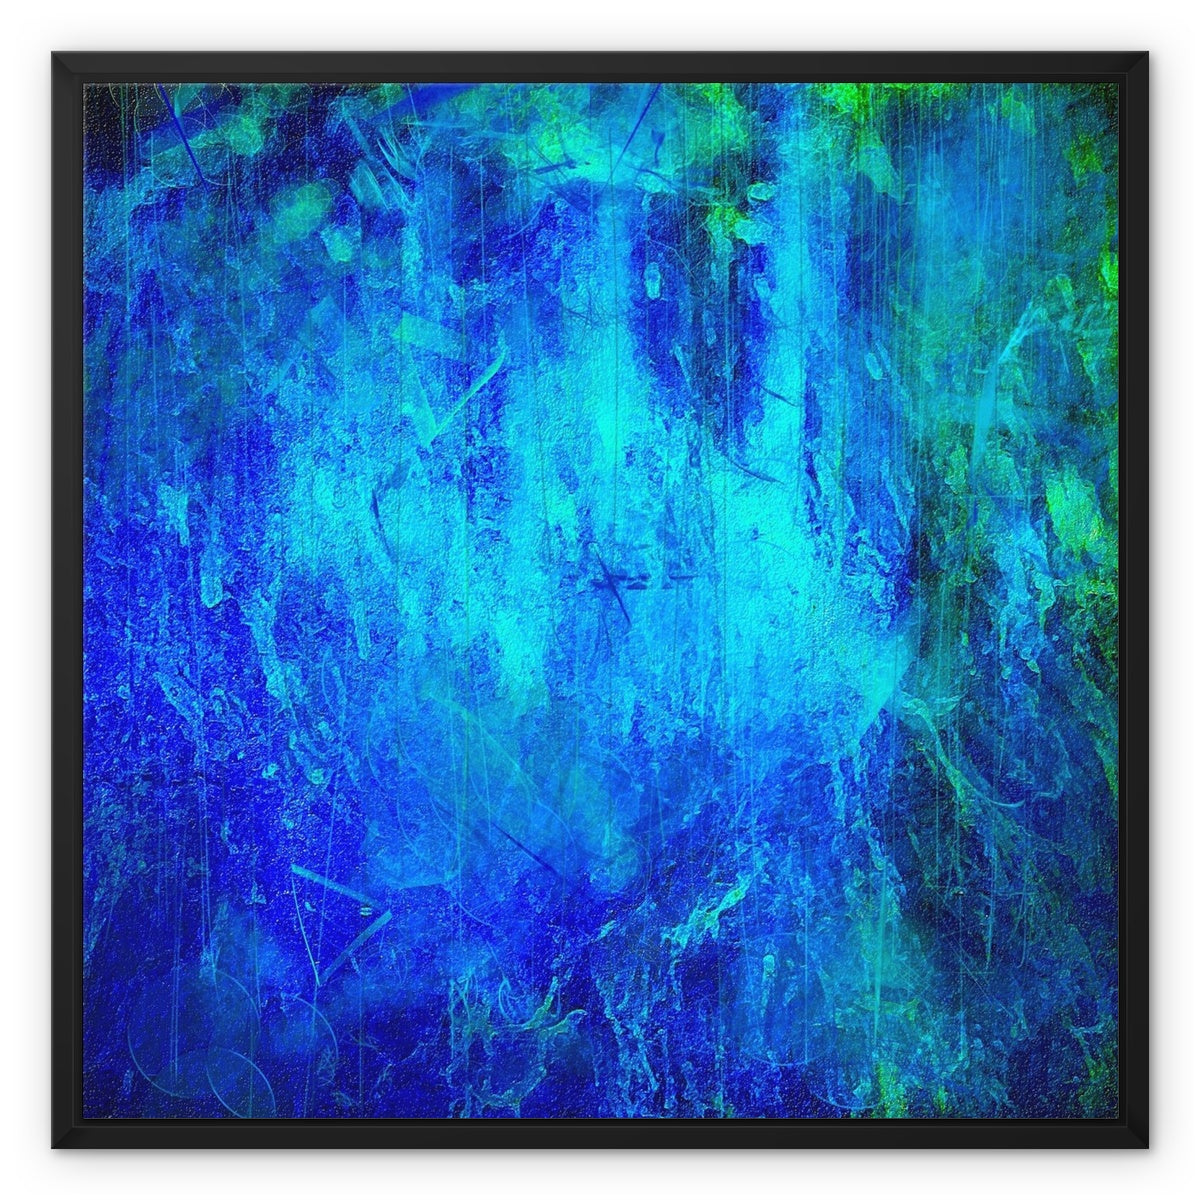 The Waterfall Abstract Painting | Framed Canvas From Scotland-Floating Framed Canvas Prints-Abstract & Impressionistic Art Gallery-24"x24"-Black Frame-Paintings, Prints, Homeware, Art Gifts From Scotland By Scottish Artist Kevin Hunter